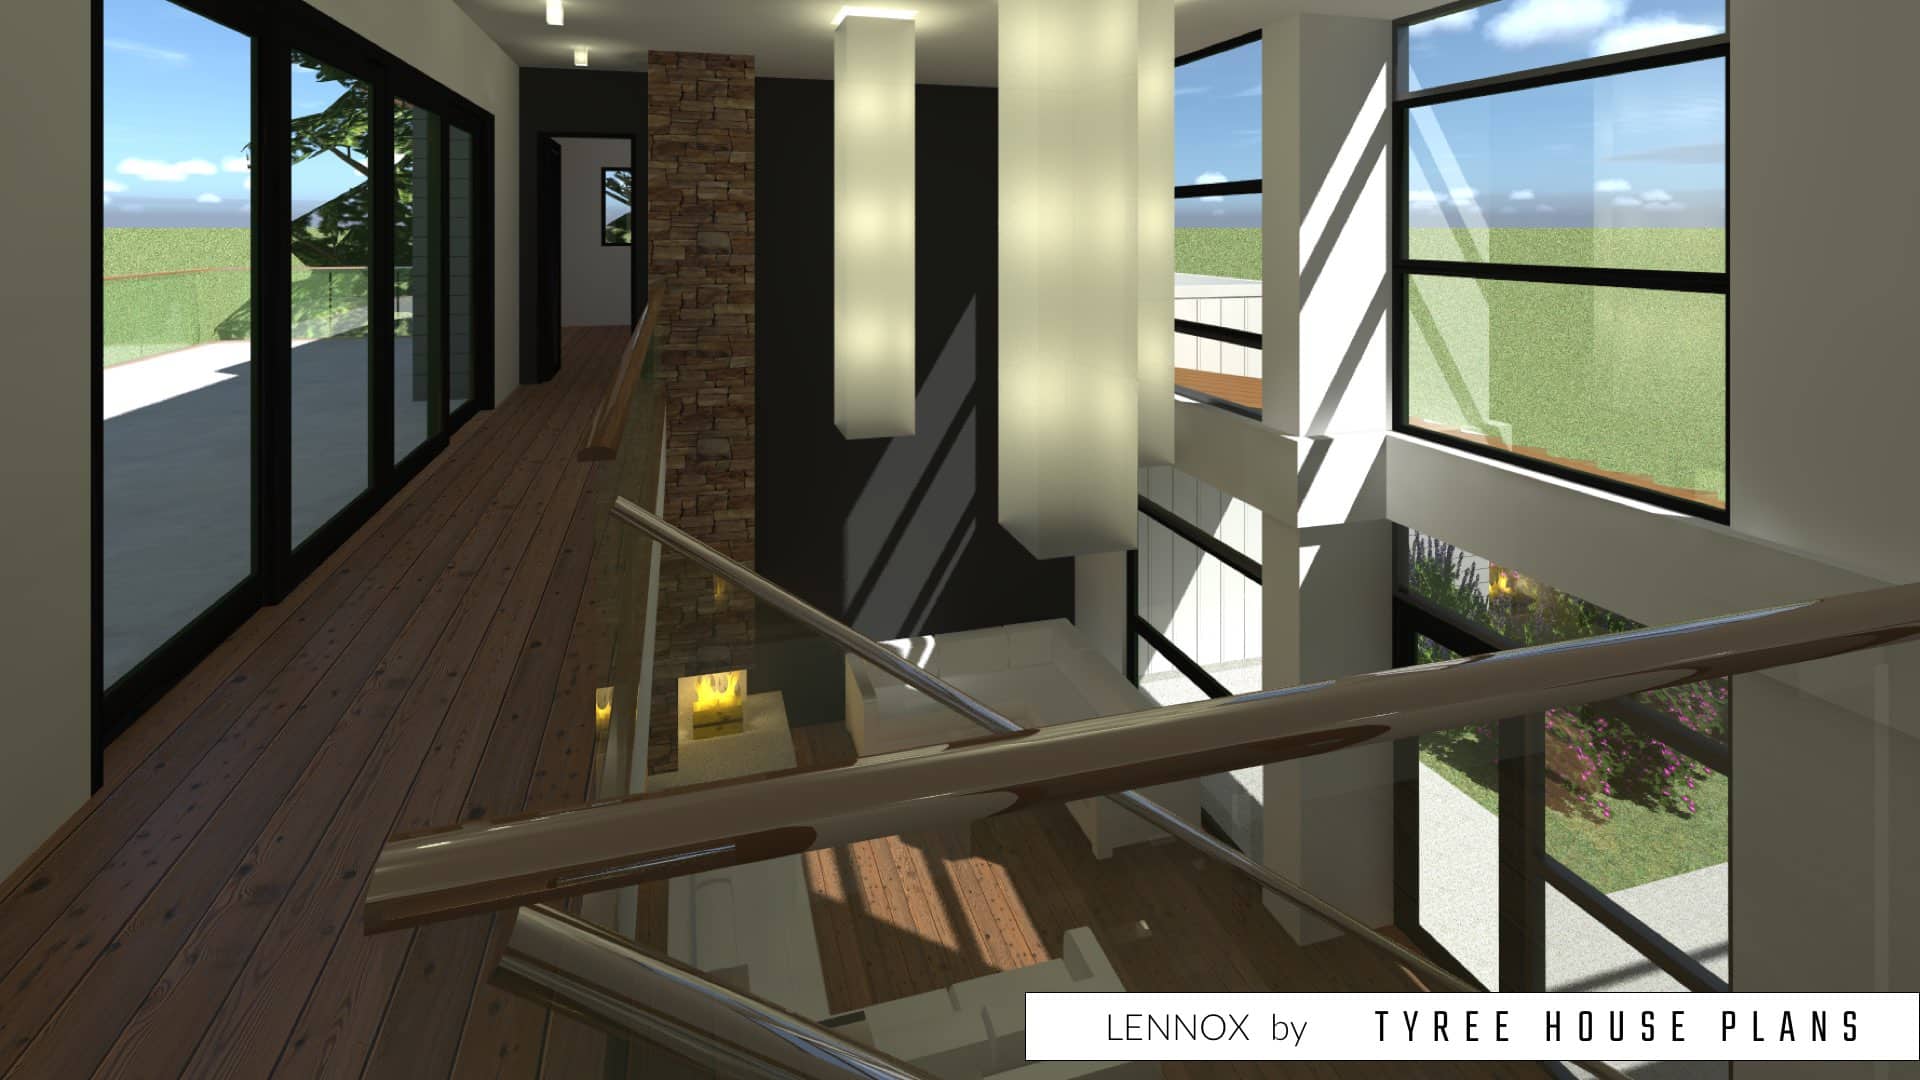 Looking down into the large living space. Lennox by Tyree House Plans